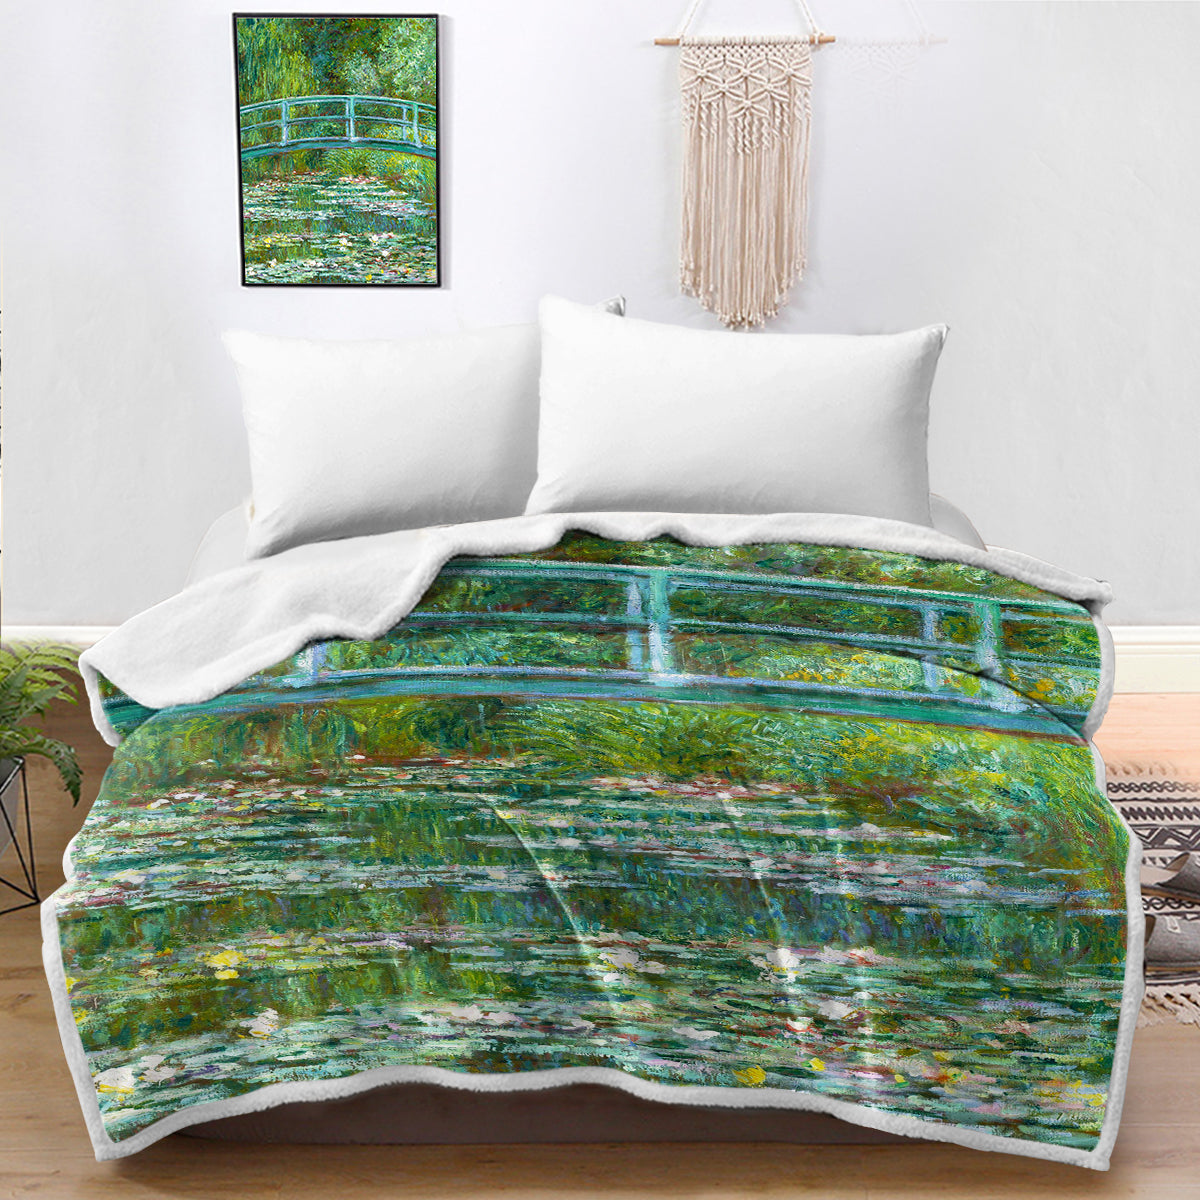 Claude Monet's The Water Lily Pond Bedspread Blanket